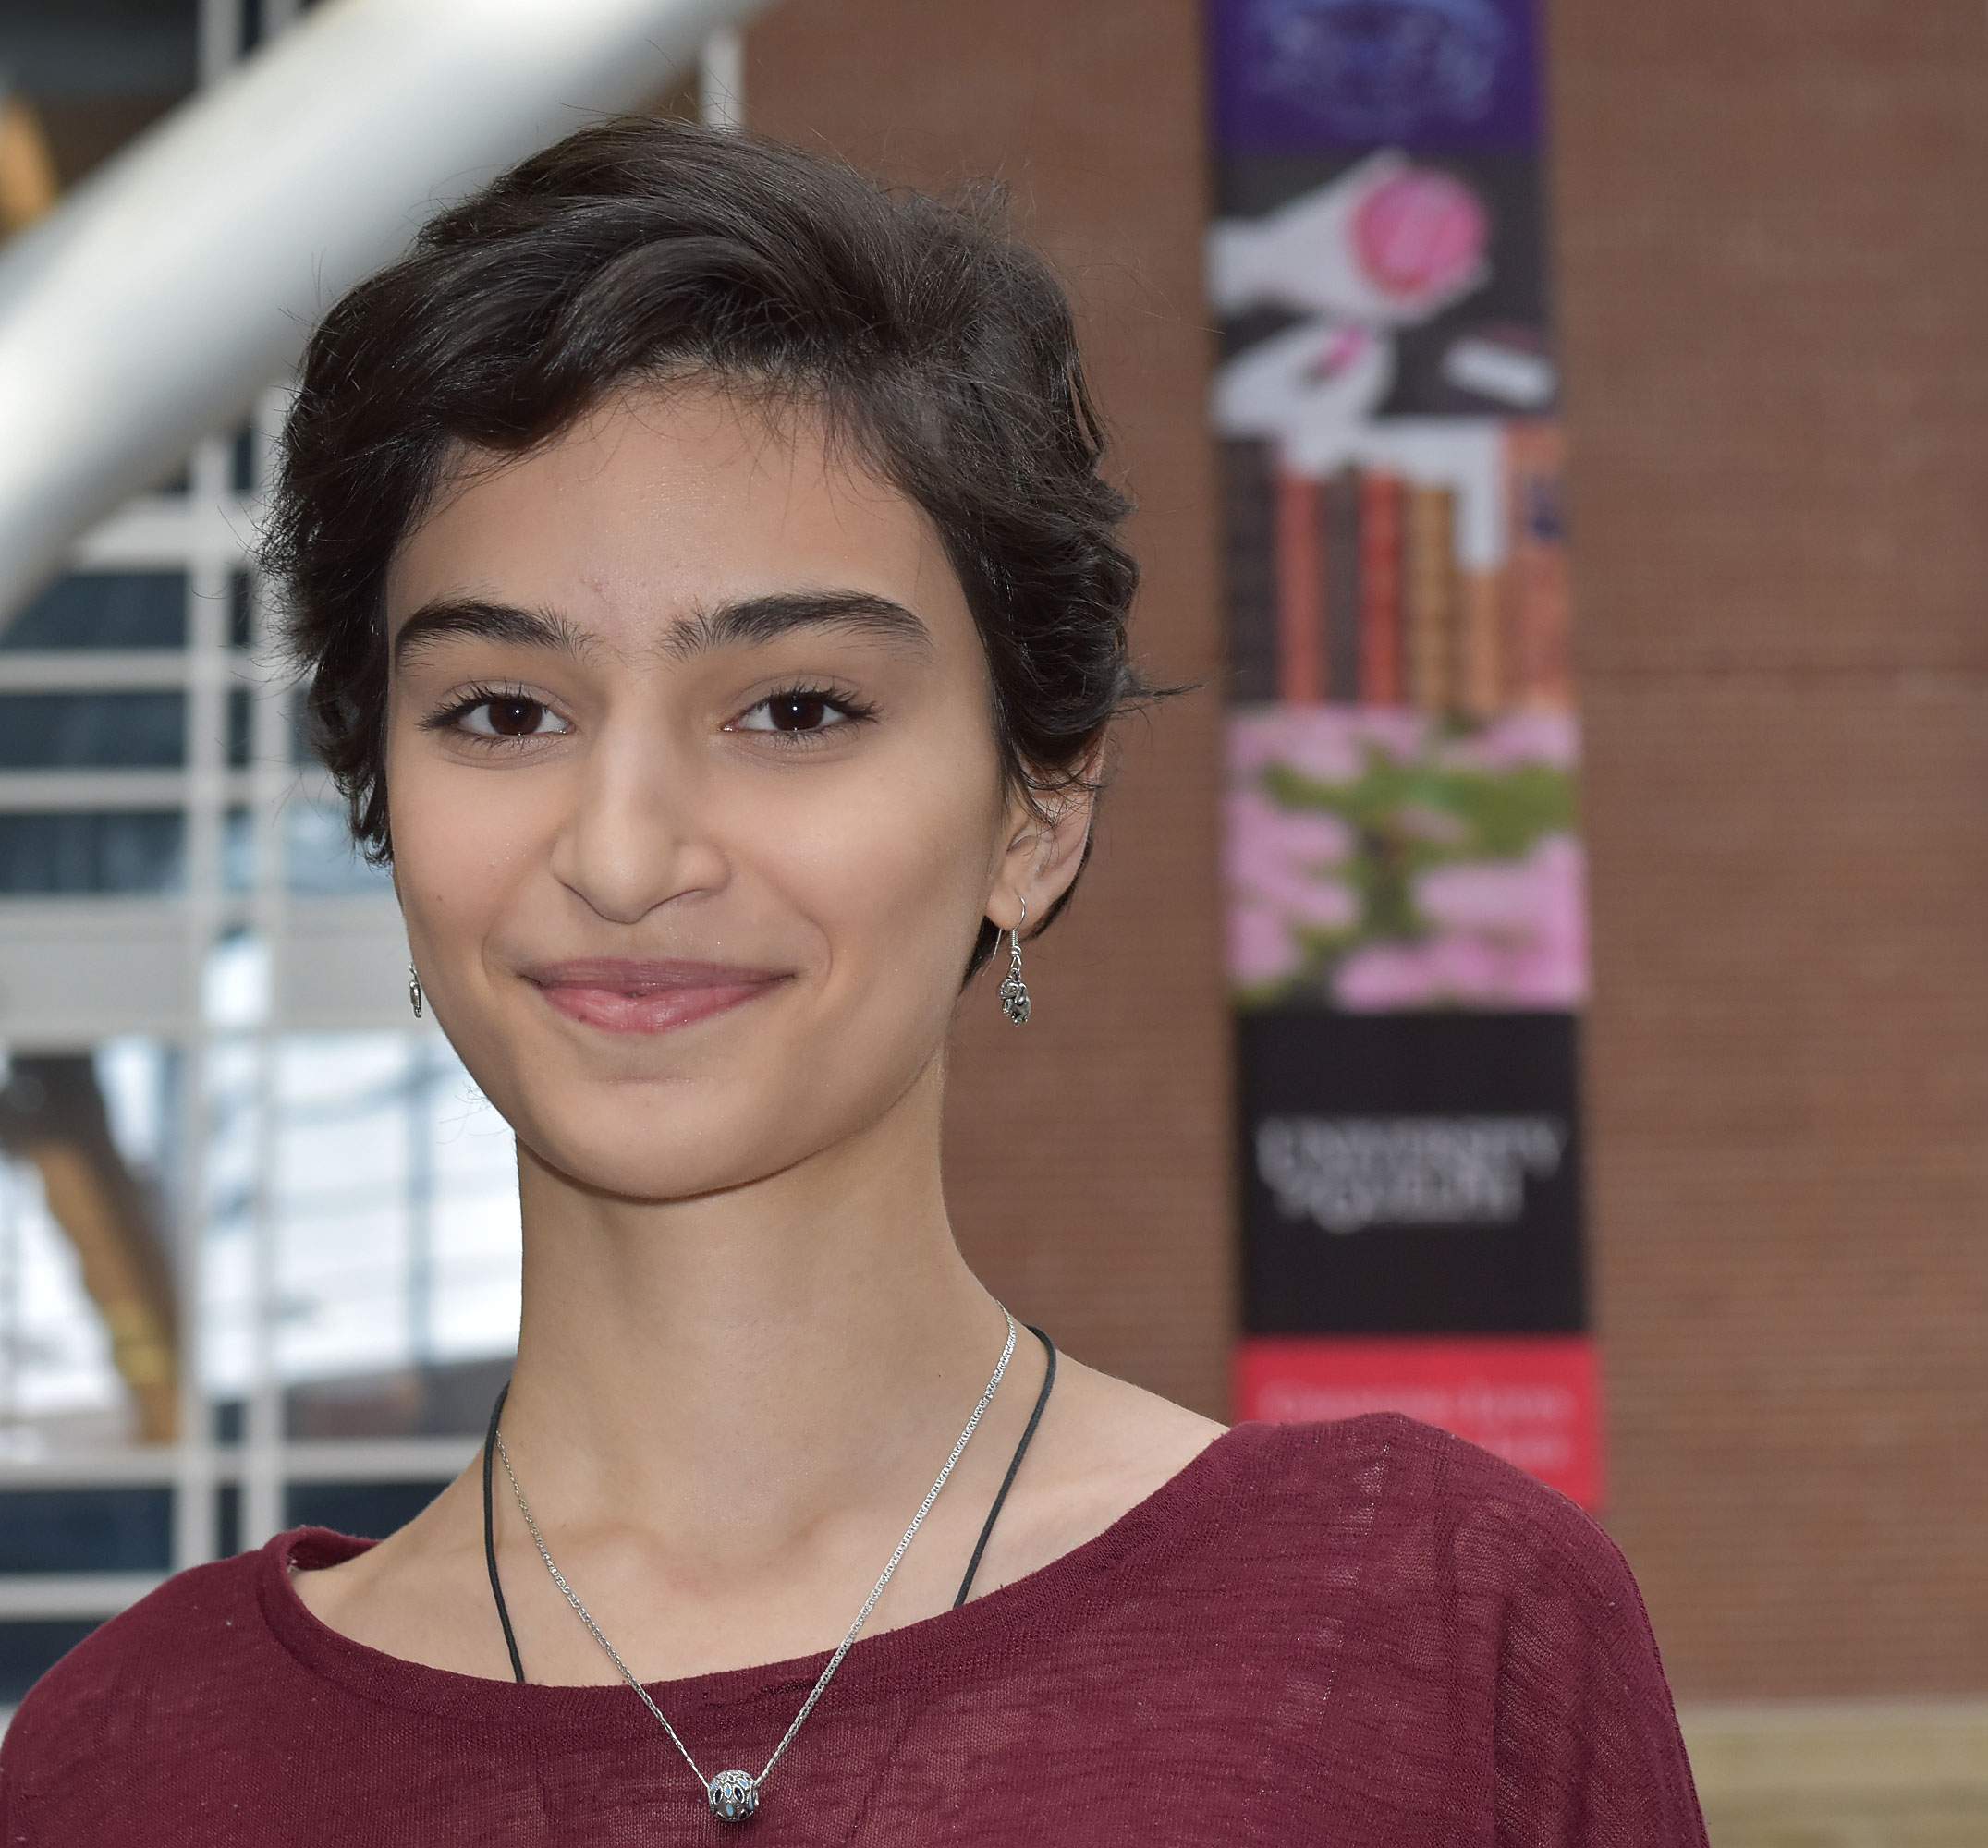 Syrian refugee student starts studies at the University of Guelph